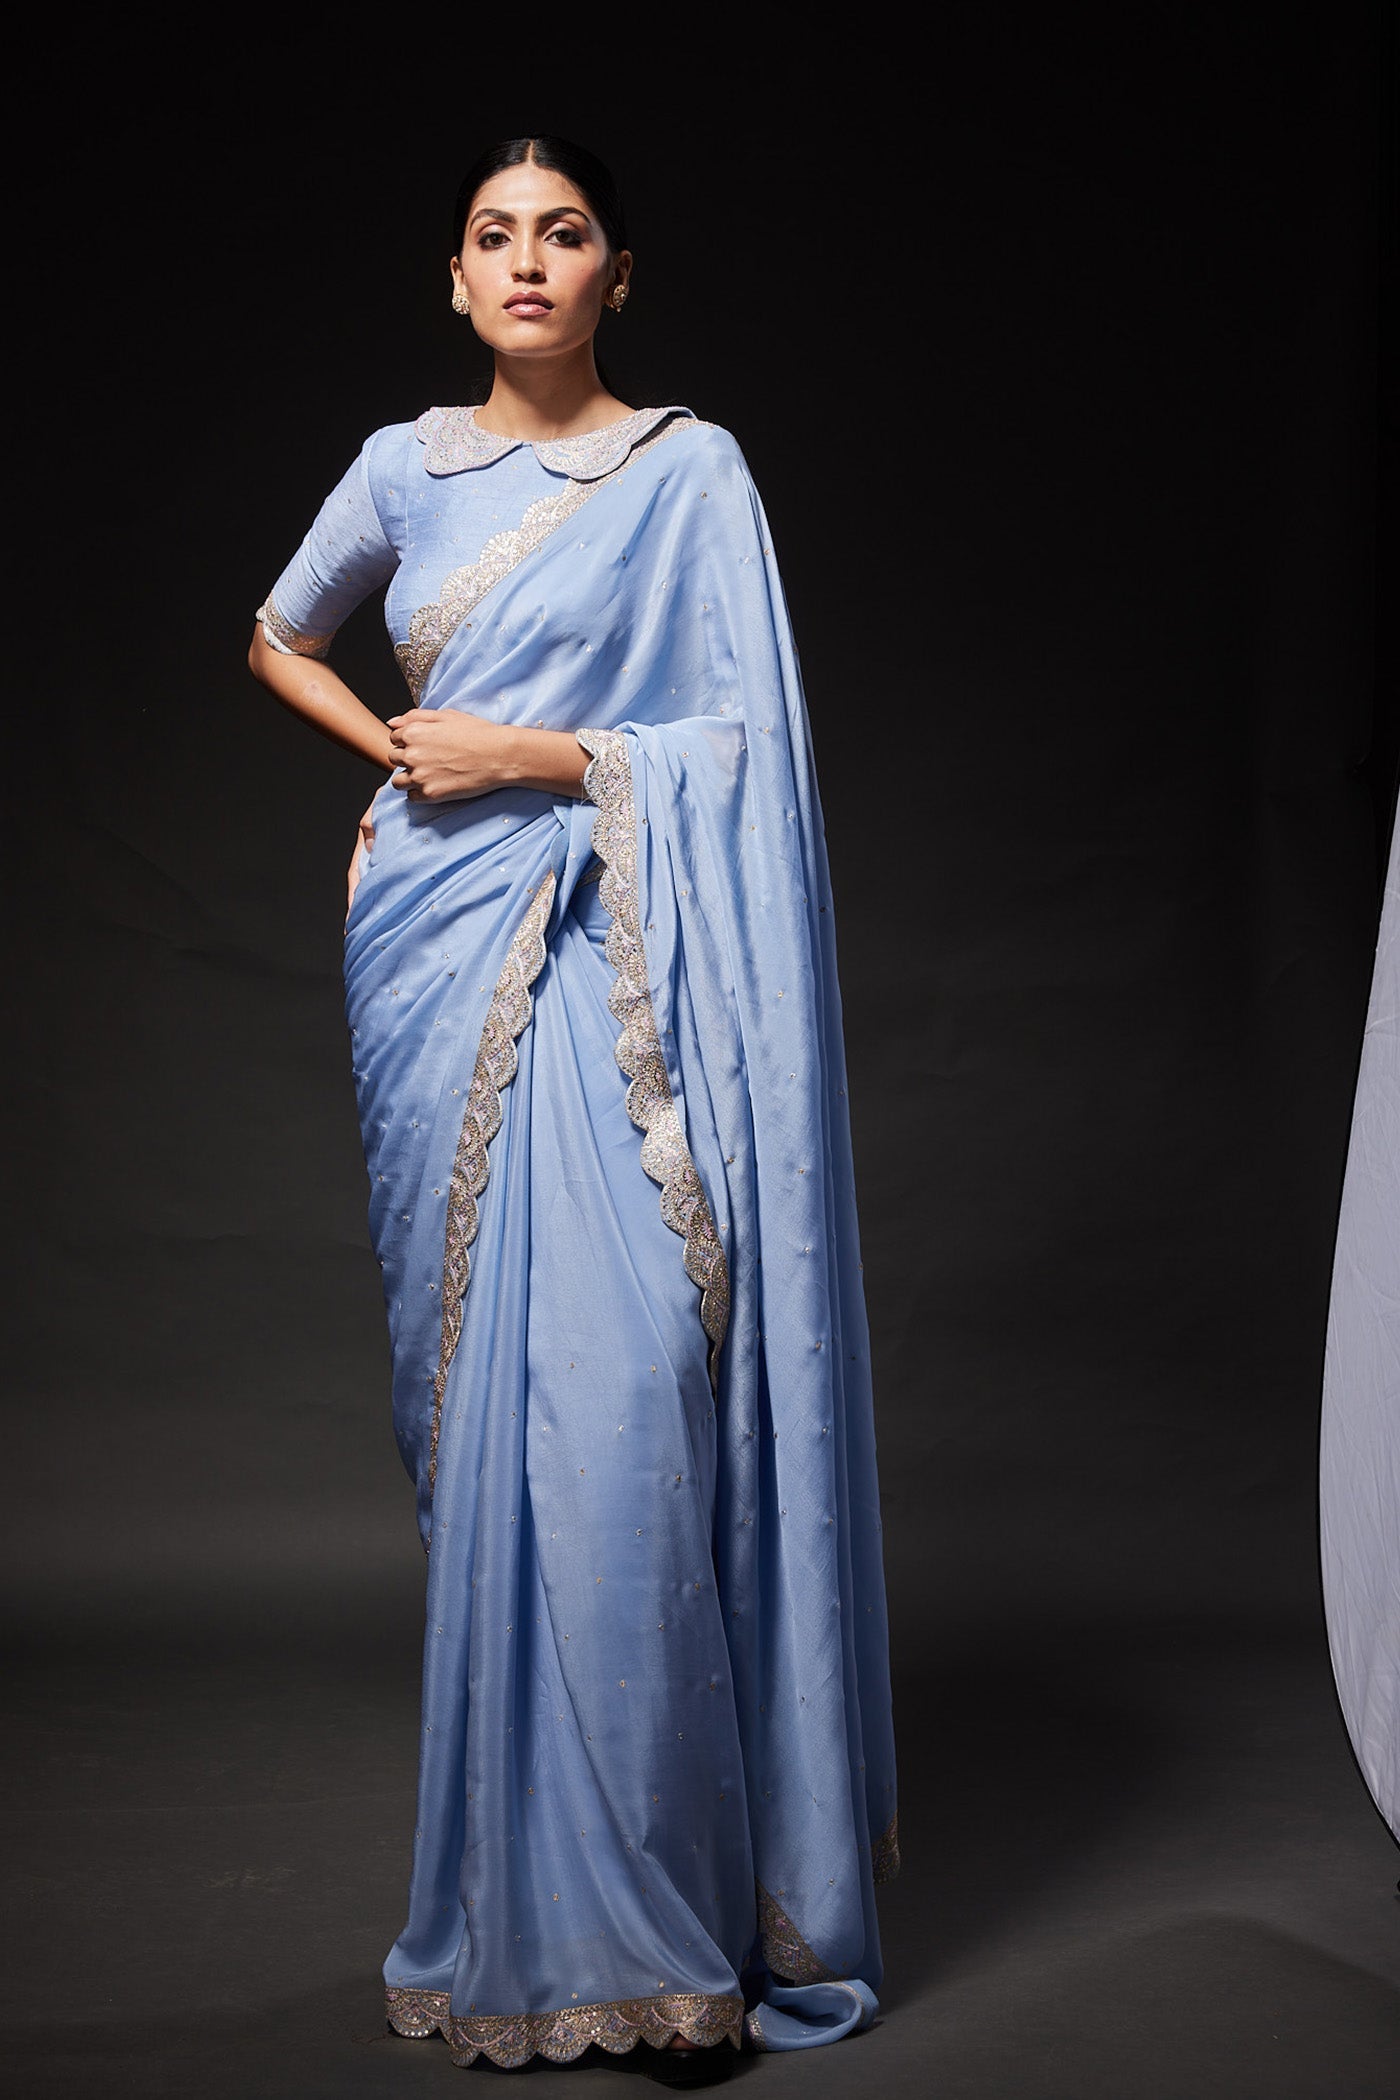 Powder blue scallop embroidered saree with peterpan collared blouse